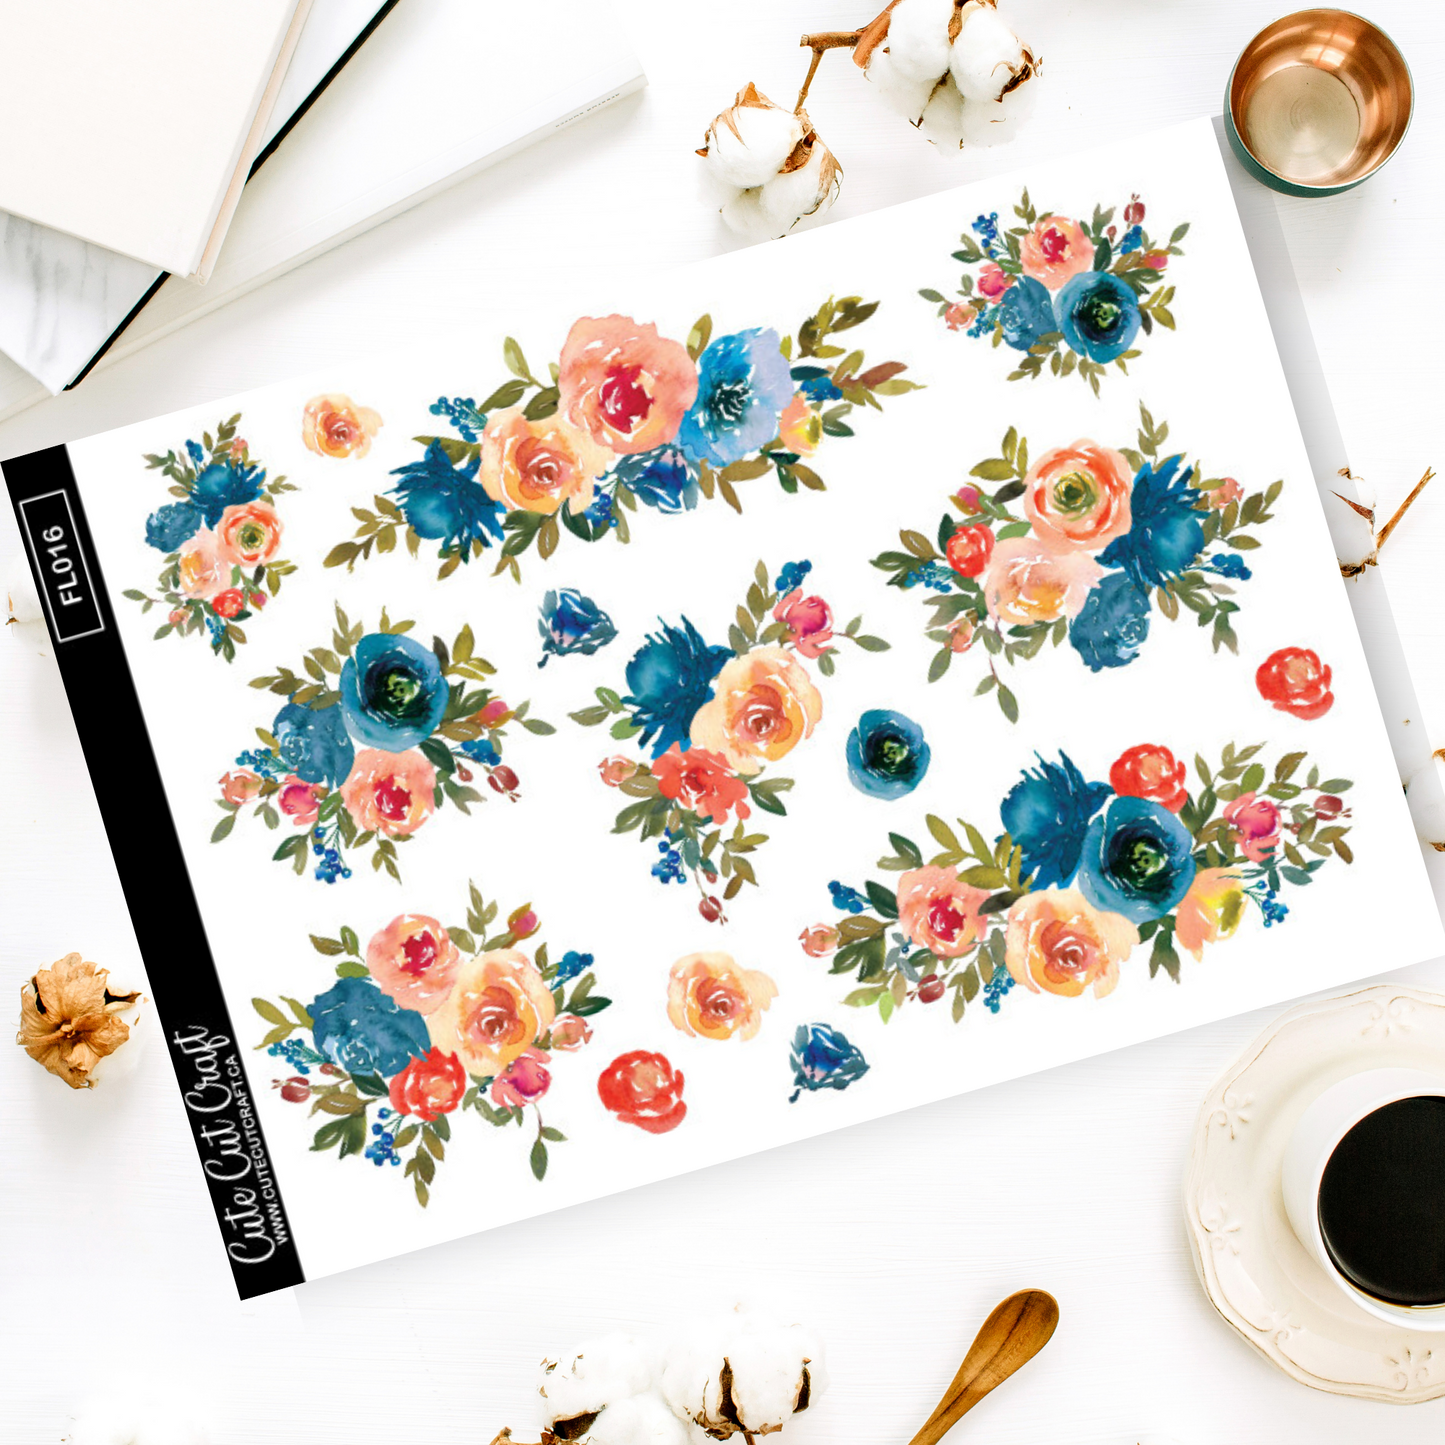 Late Winter Florals || Decorative Foiled Sheet